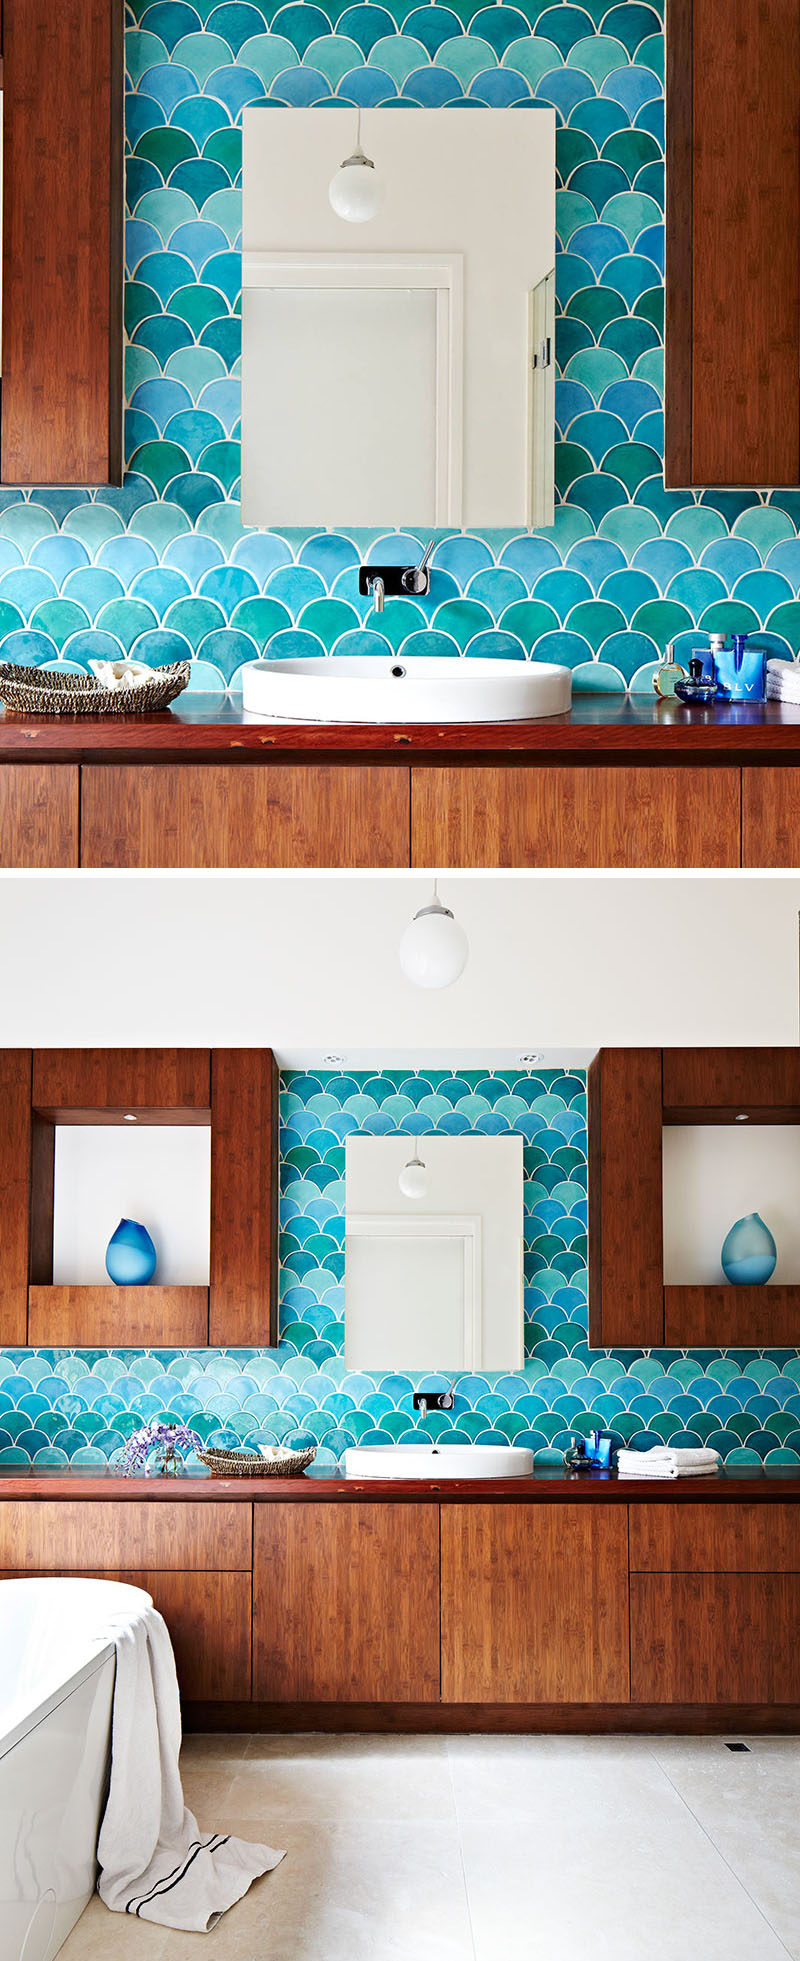 Wall Tile Idea - 5 Reasons Why You Should Get Creative With Fish Scale Tiles